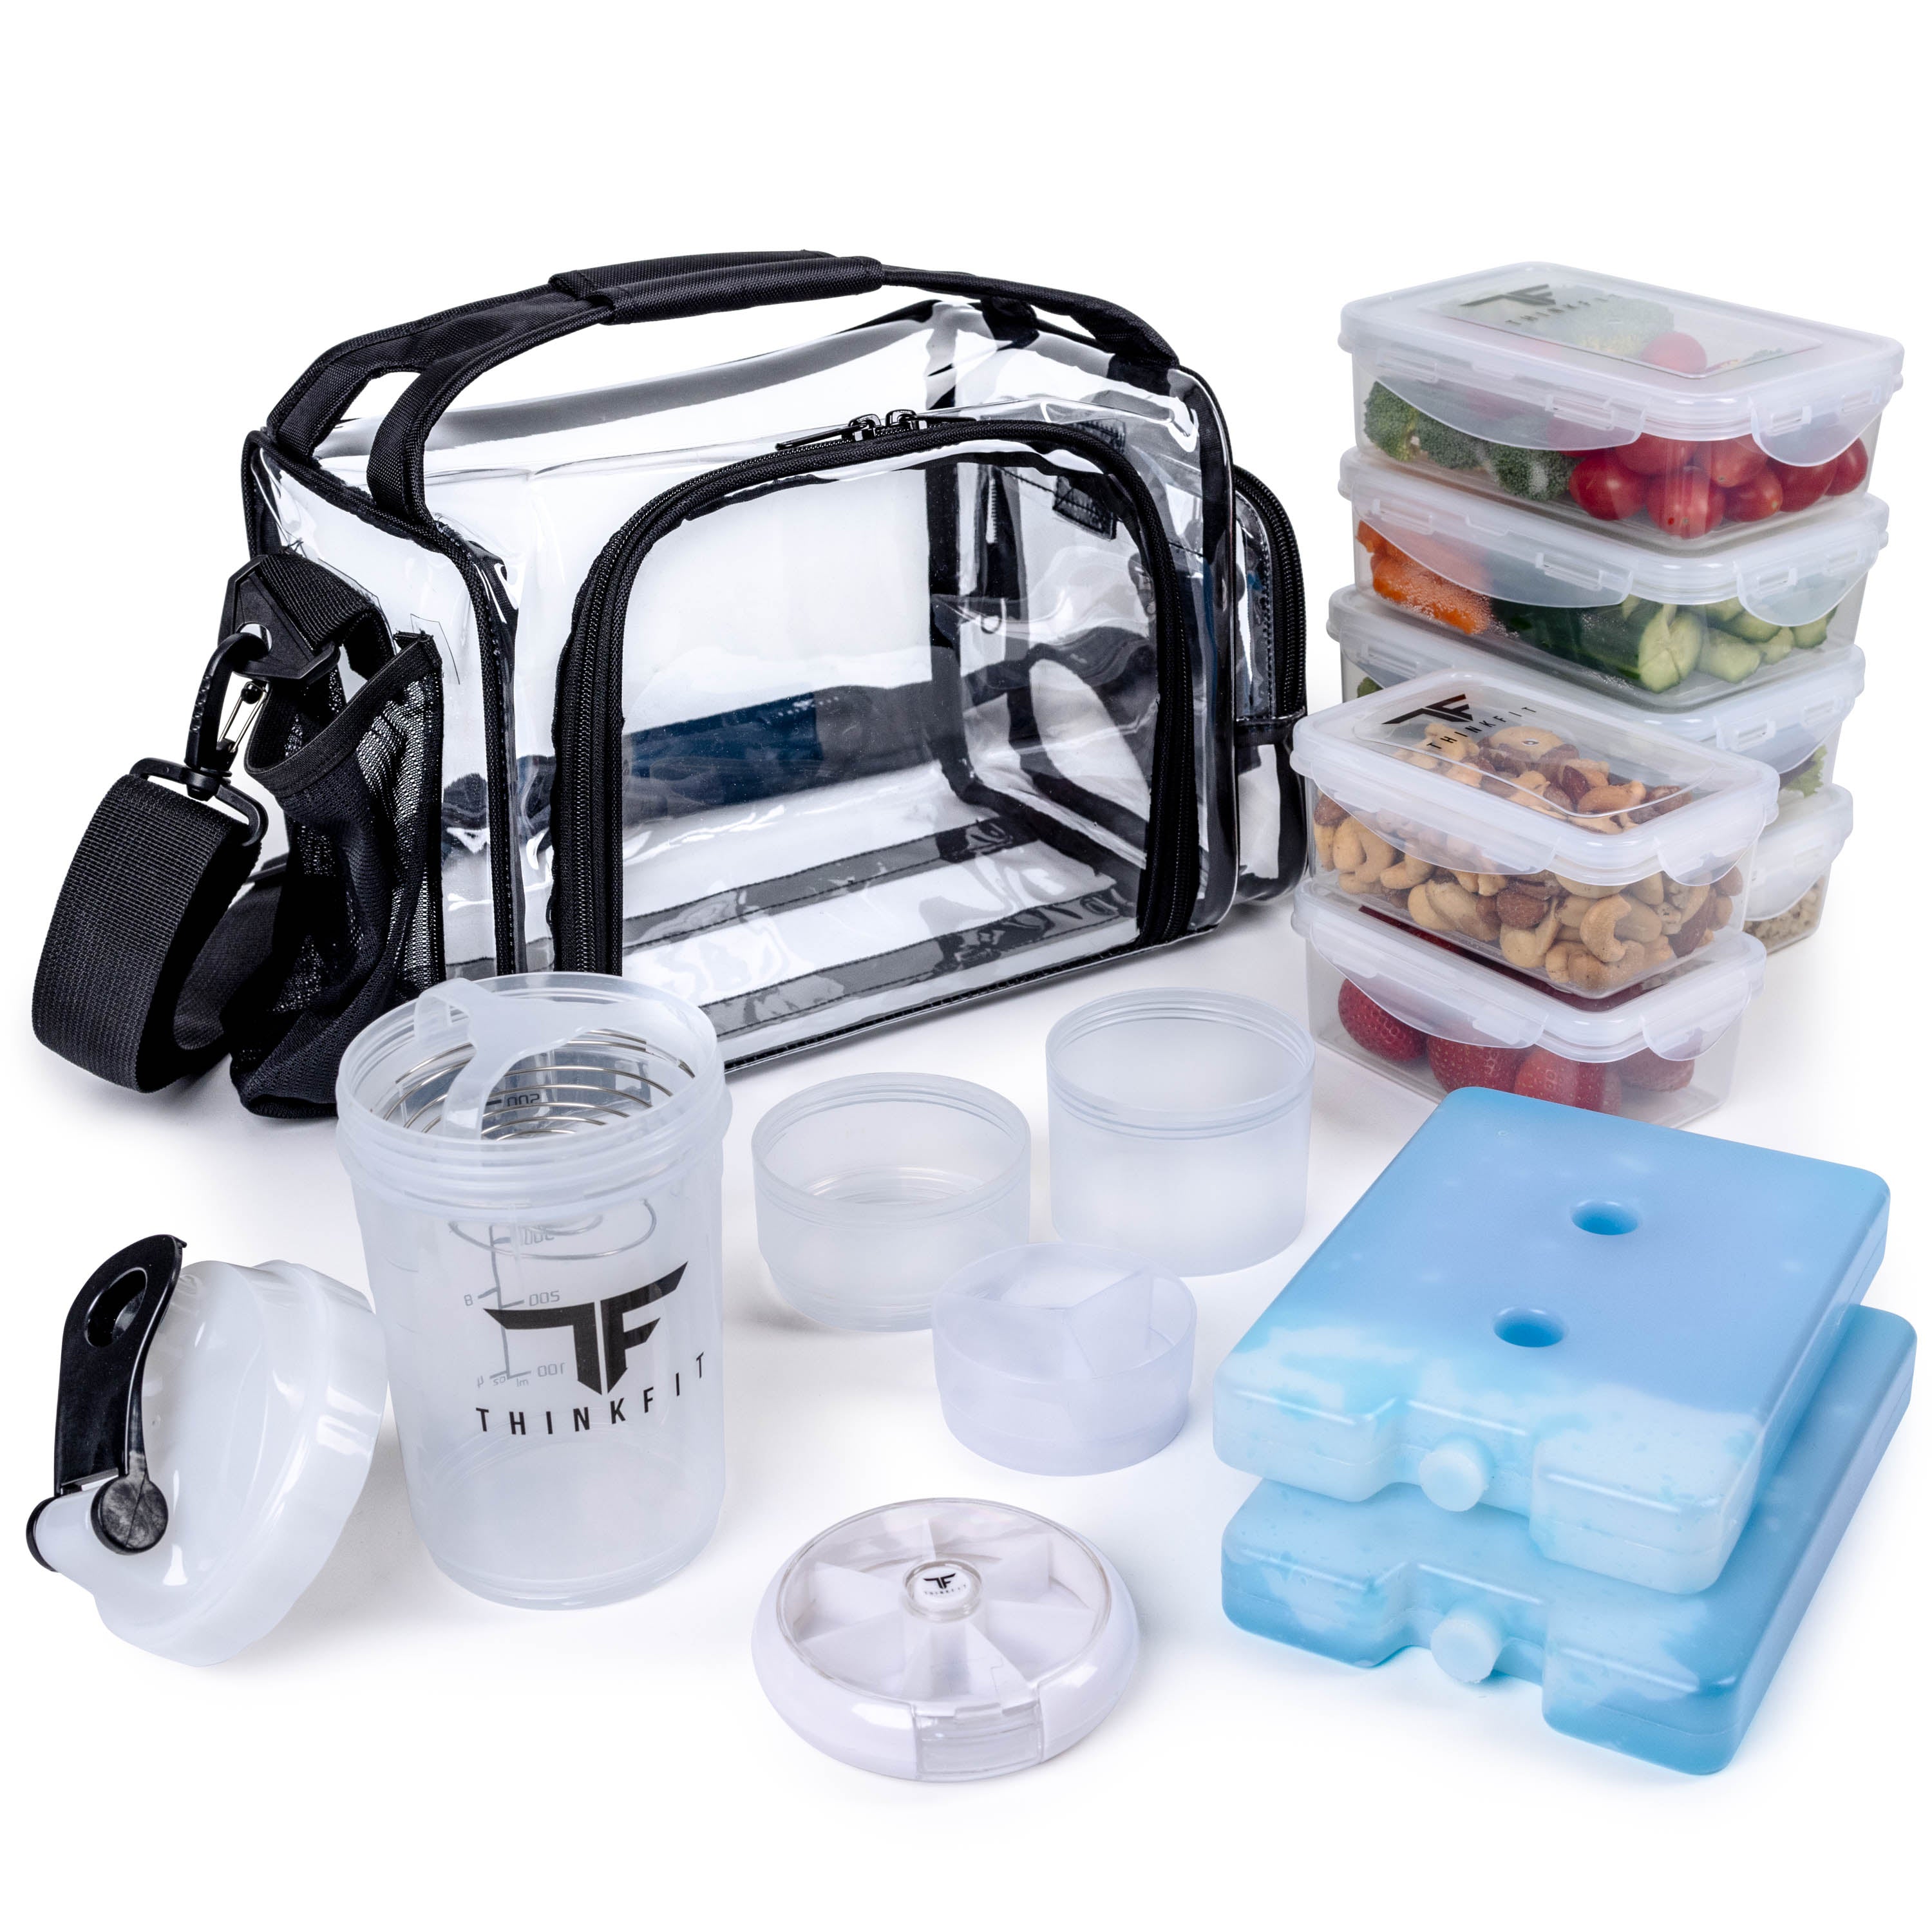  CB Japan DSK Lunch Bag, Clear Pink, Thin Lunch Box, Foodman,  Dedicated Zip Case : Home & Kitchen